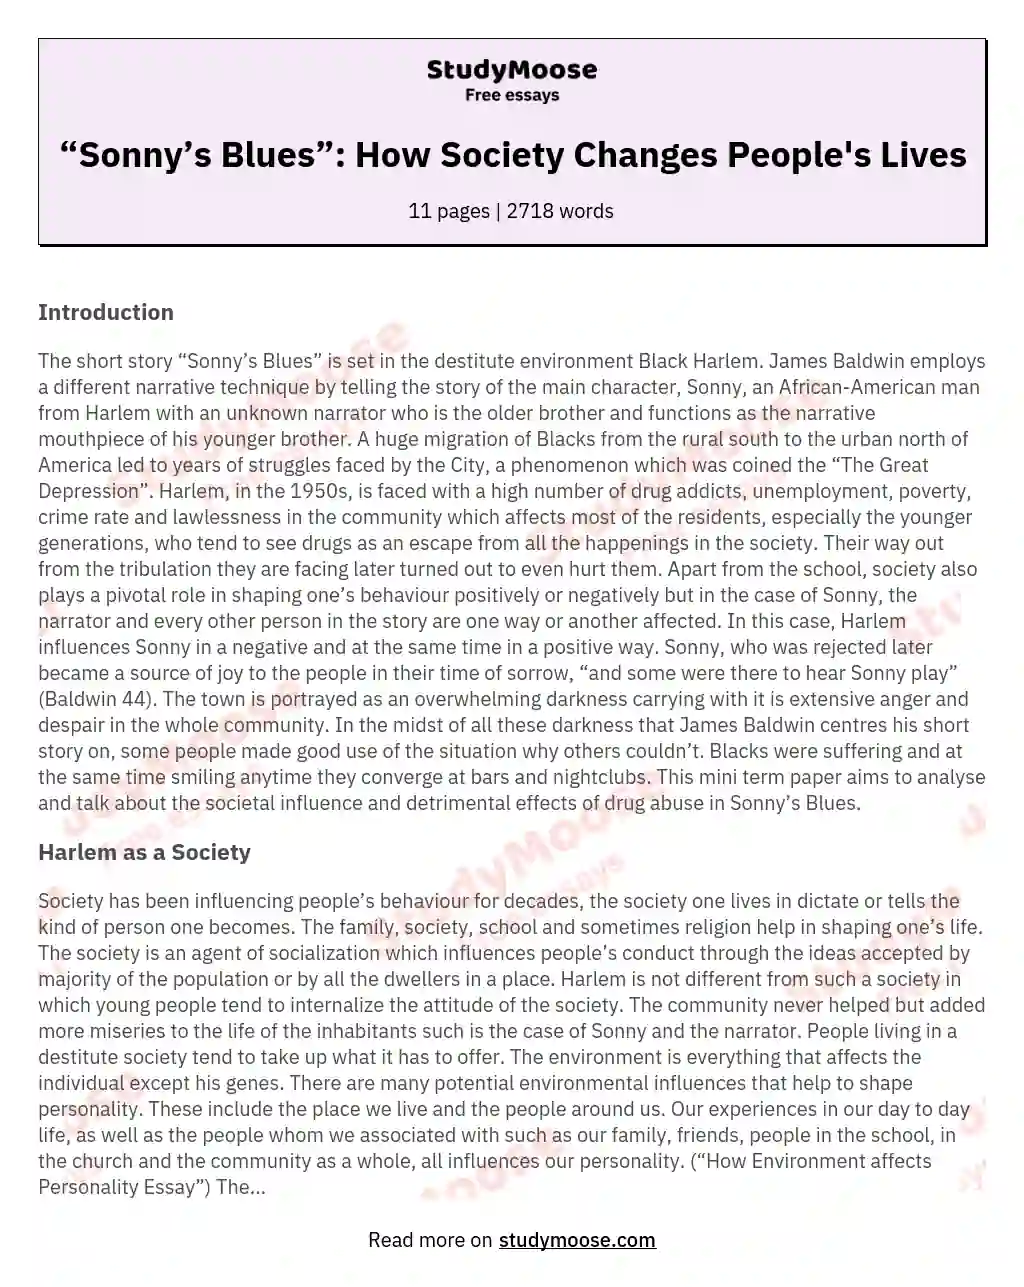 “Sonny’s Blues”: How Society Changes People's Lives essay